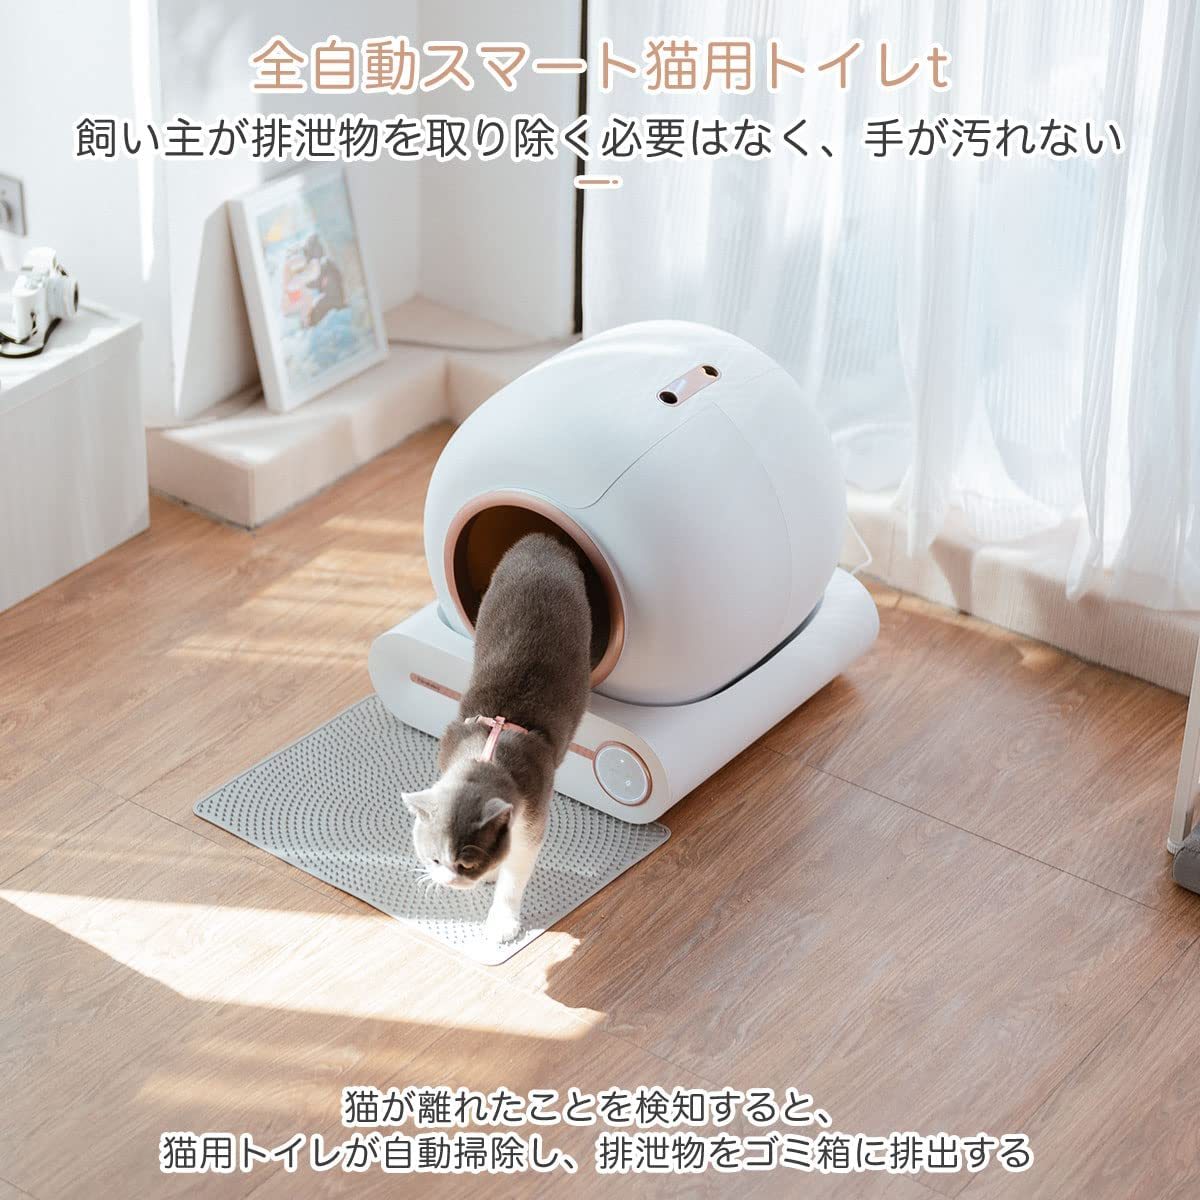 Pandaloli toilet cat automatic toilet smartphone control sensor attaching .. prevention automatic cleaning exclusive use APP IOS/Android correspondence 